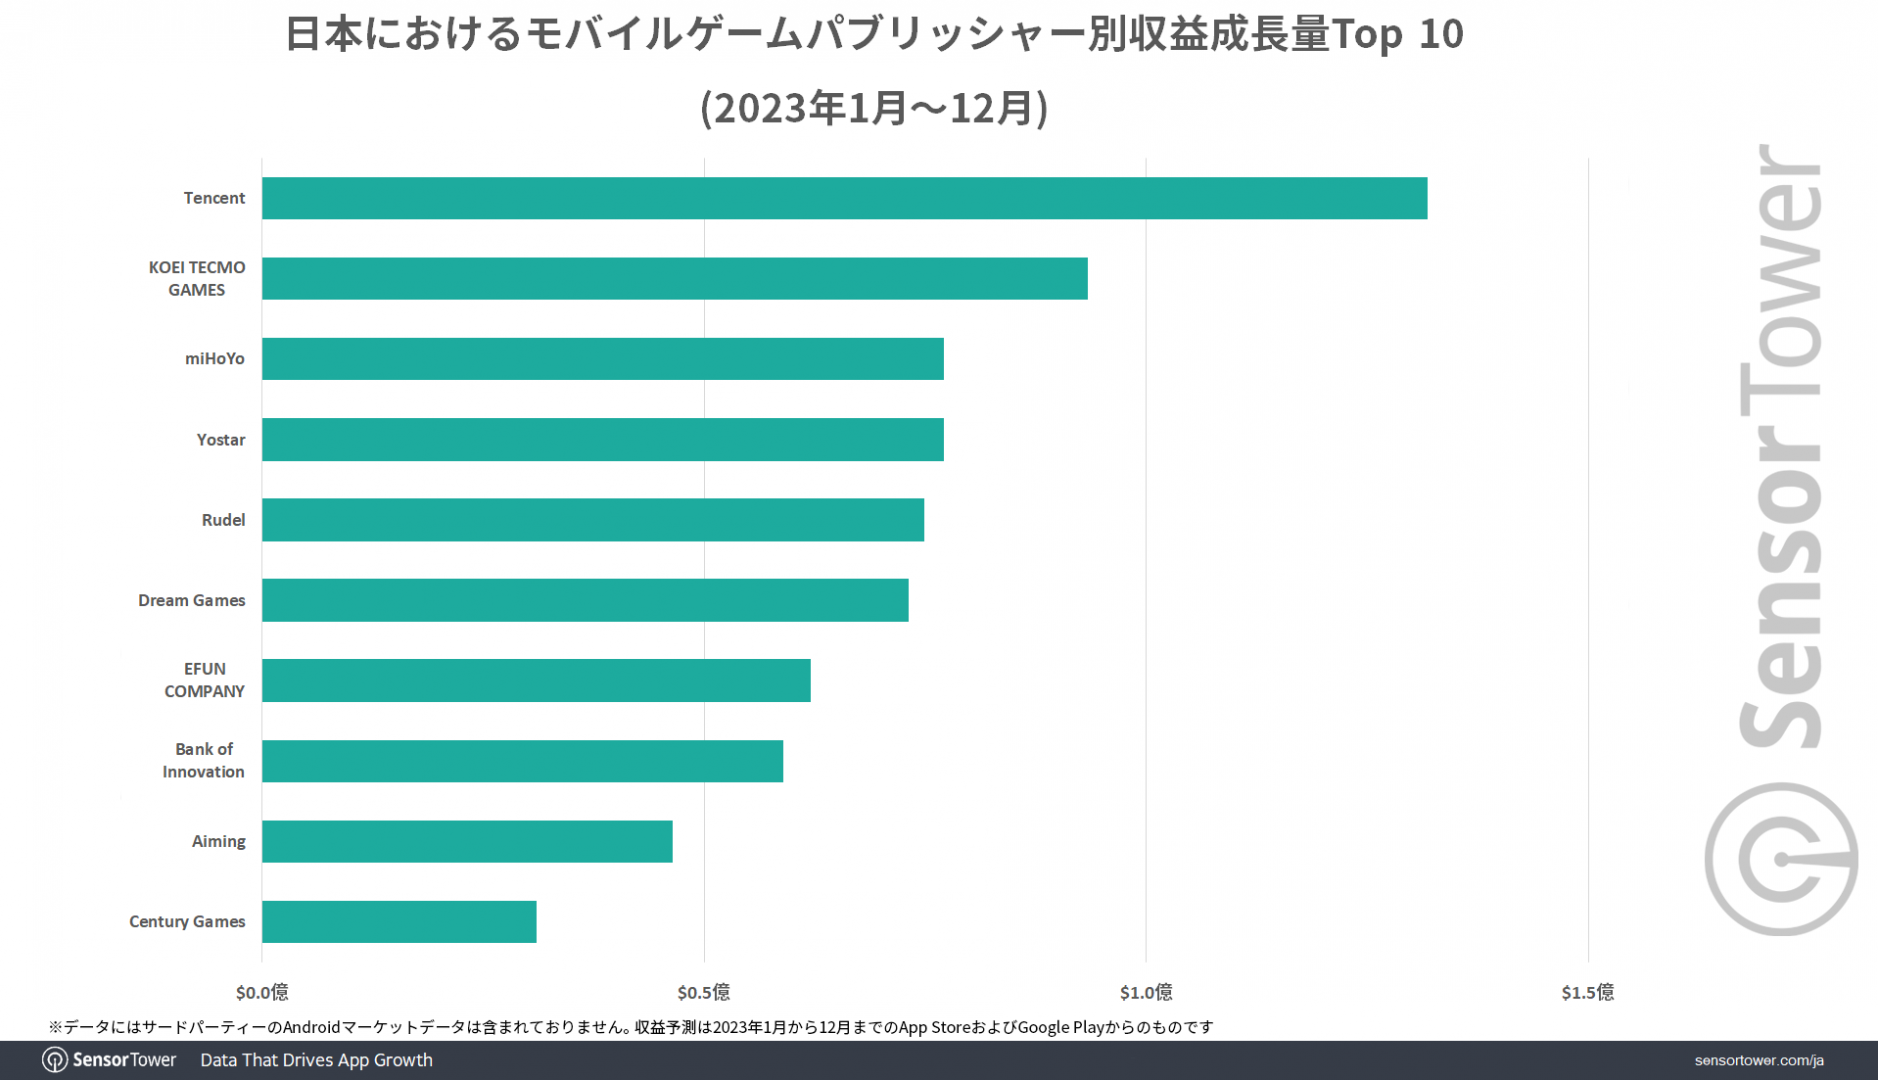 Top 10 publisher ranking in terms of revenue growth (Sensor Tower)